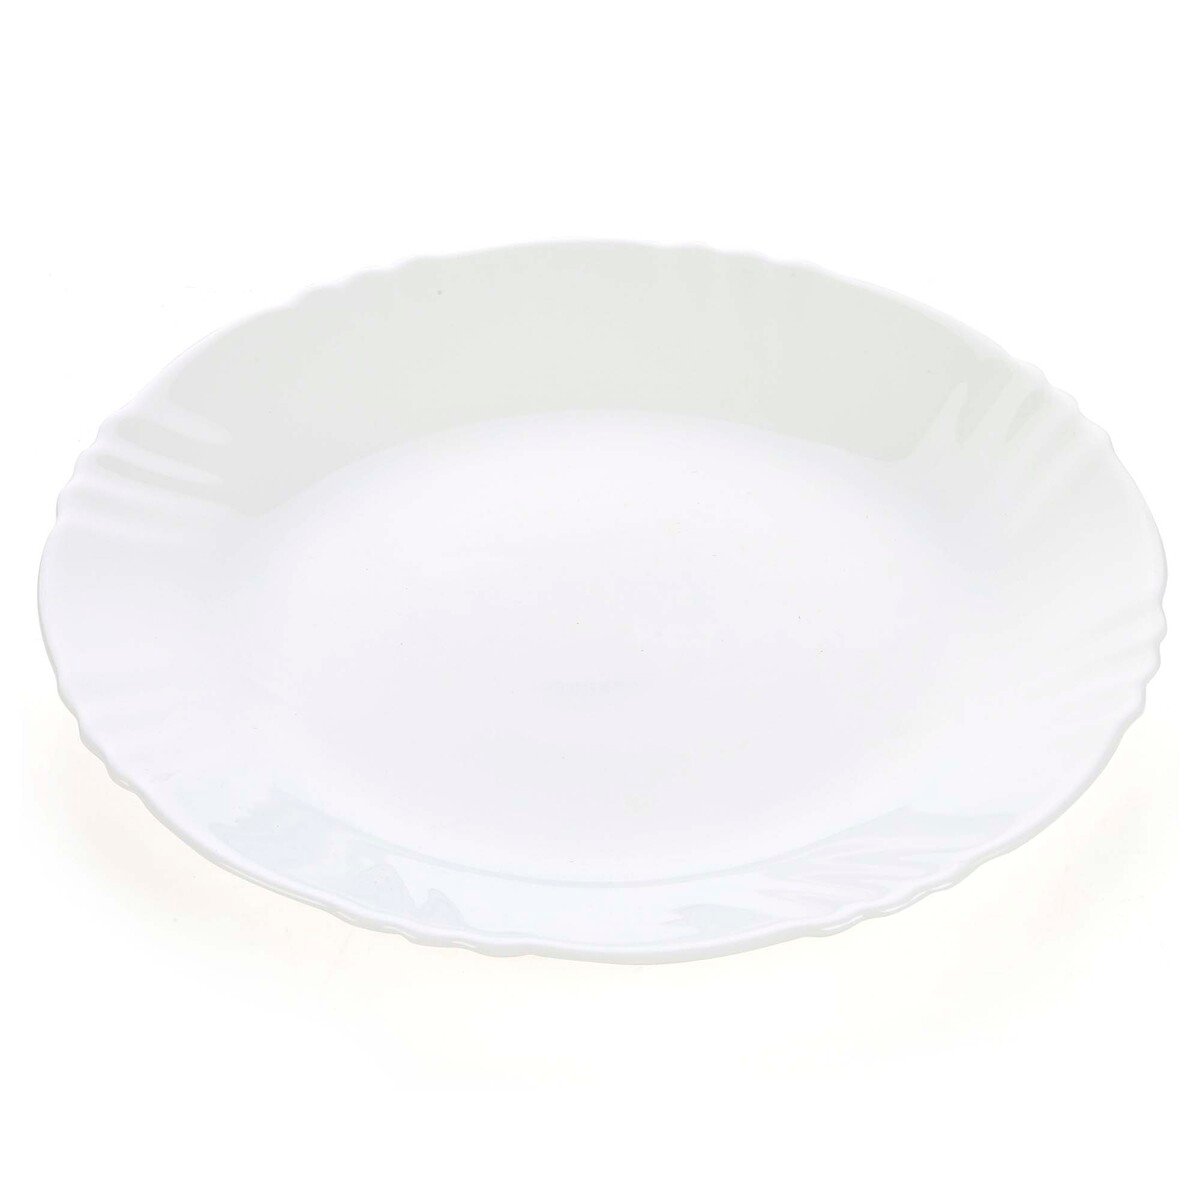 Cello 11 Inches Dinner Plate, PW27-C